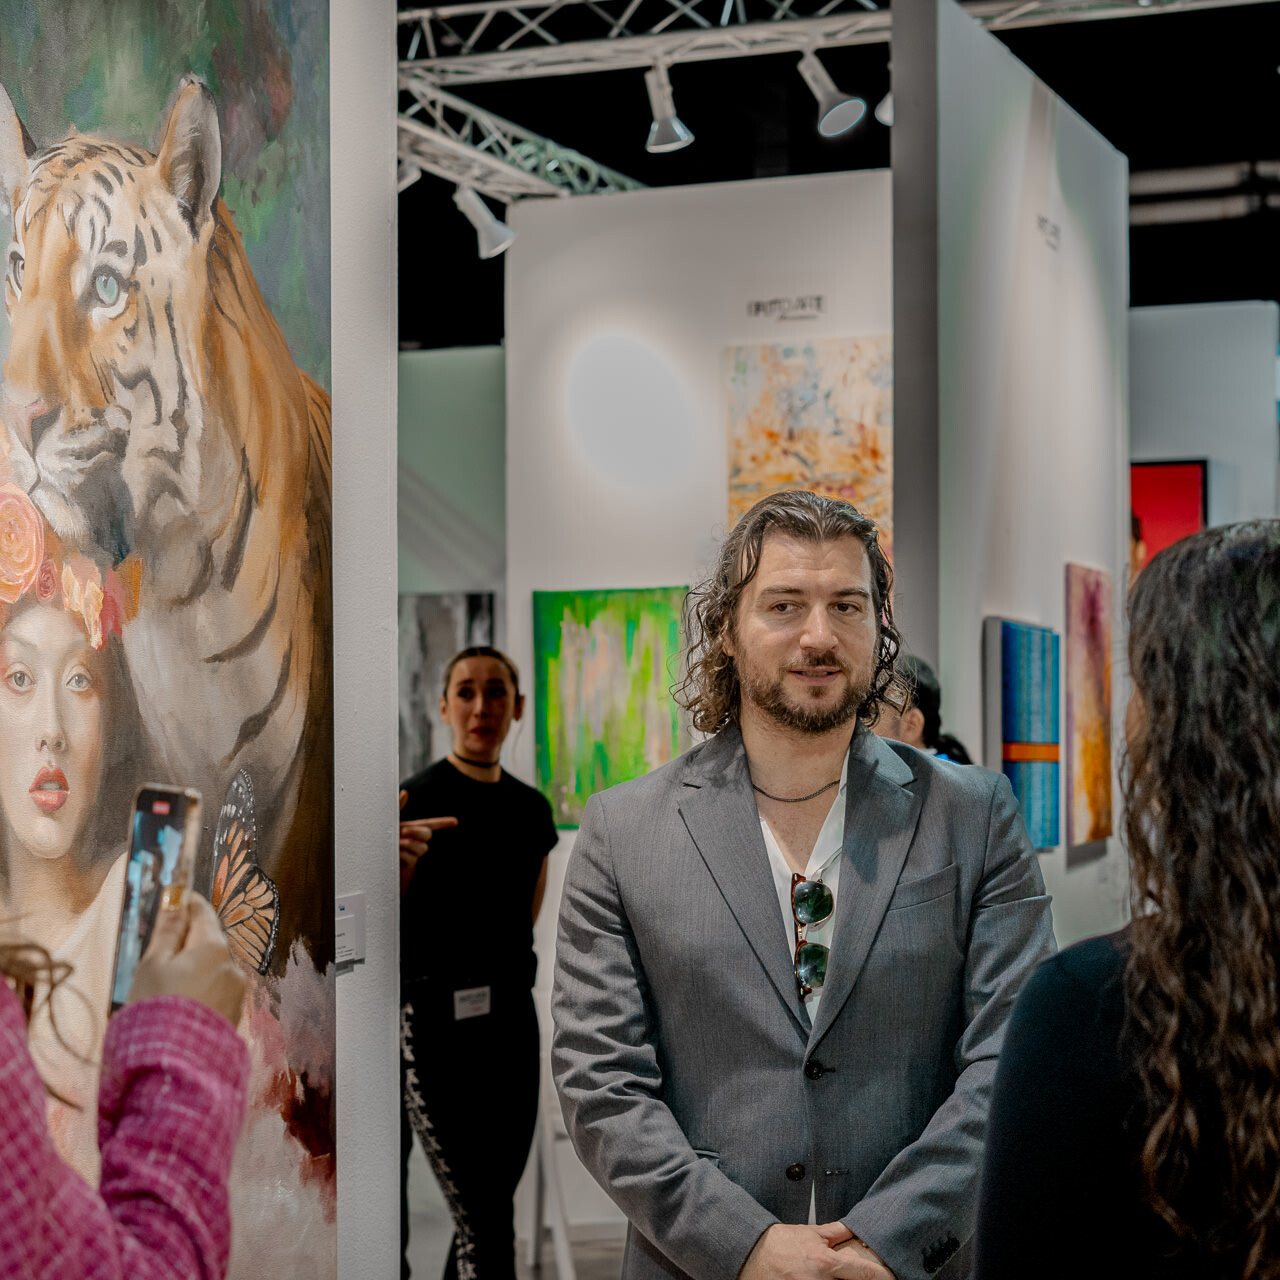 Artist Alex Righetto discusses his work with attendees at Miami Art Week, with 'The Guardian' painting prominently featured.